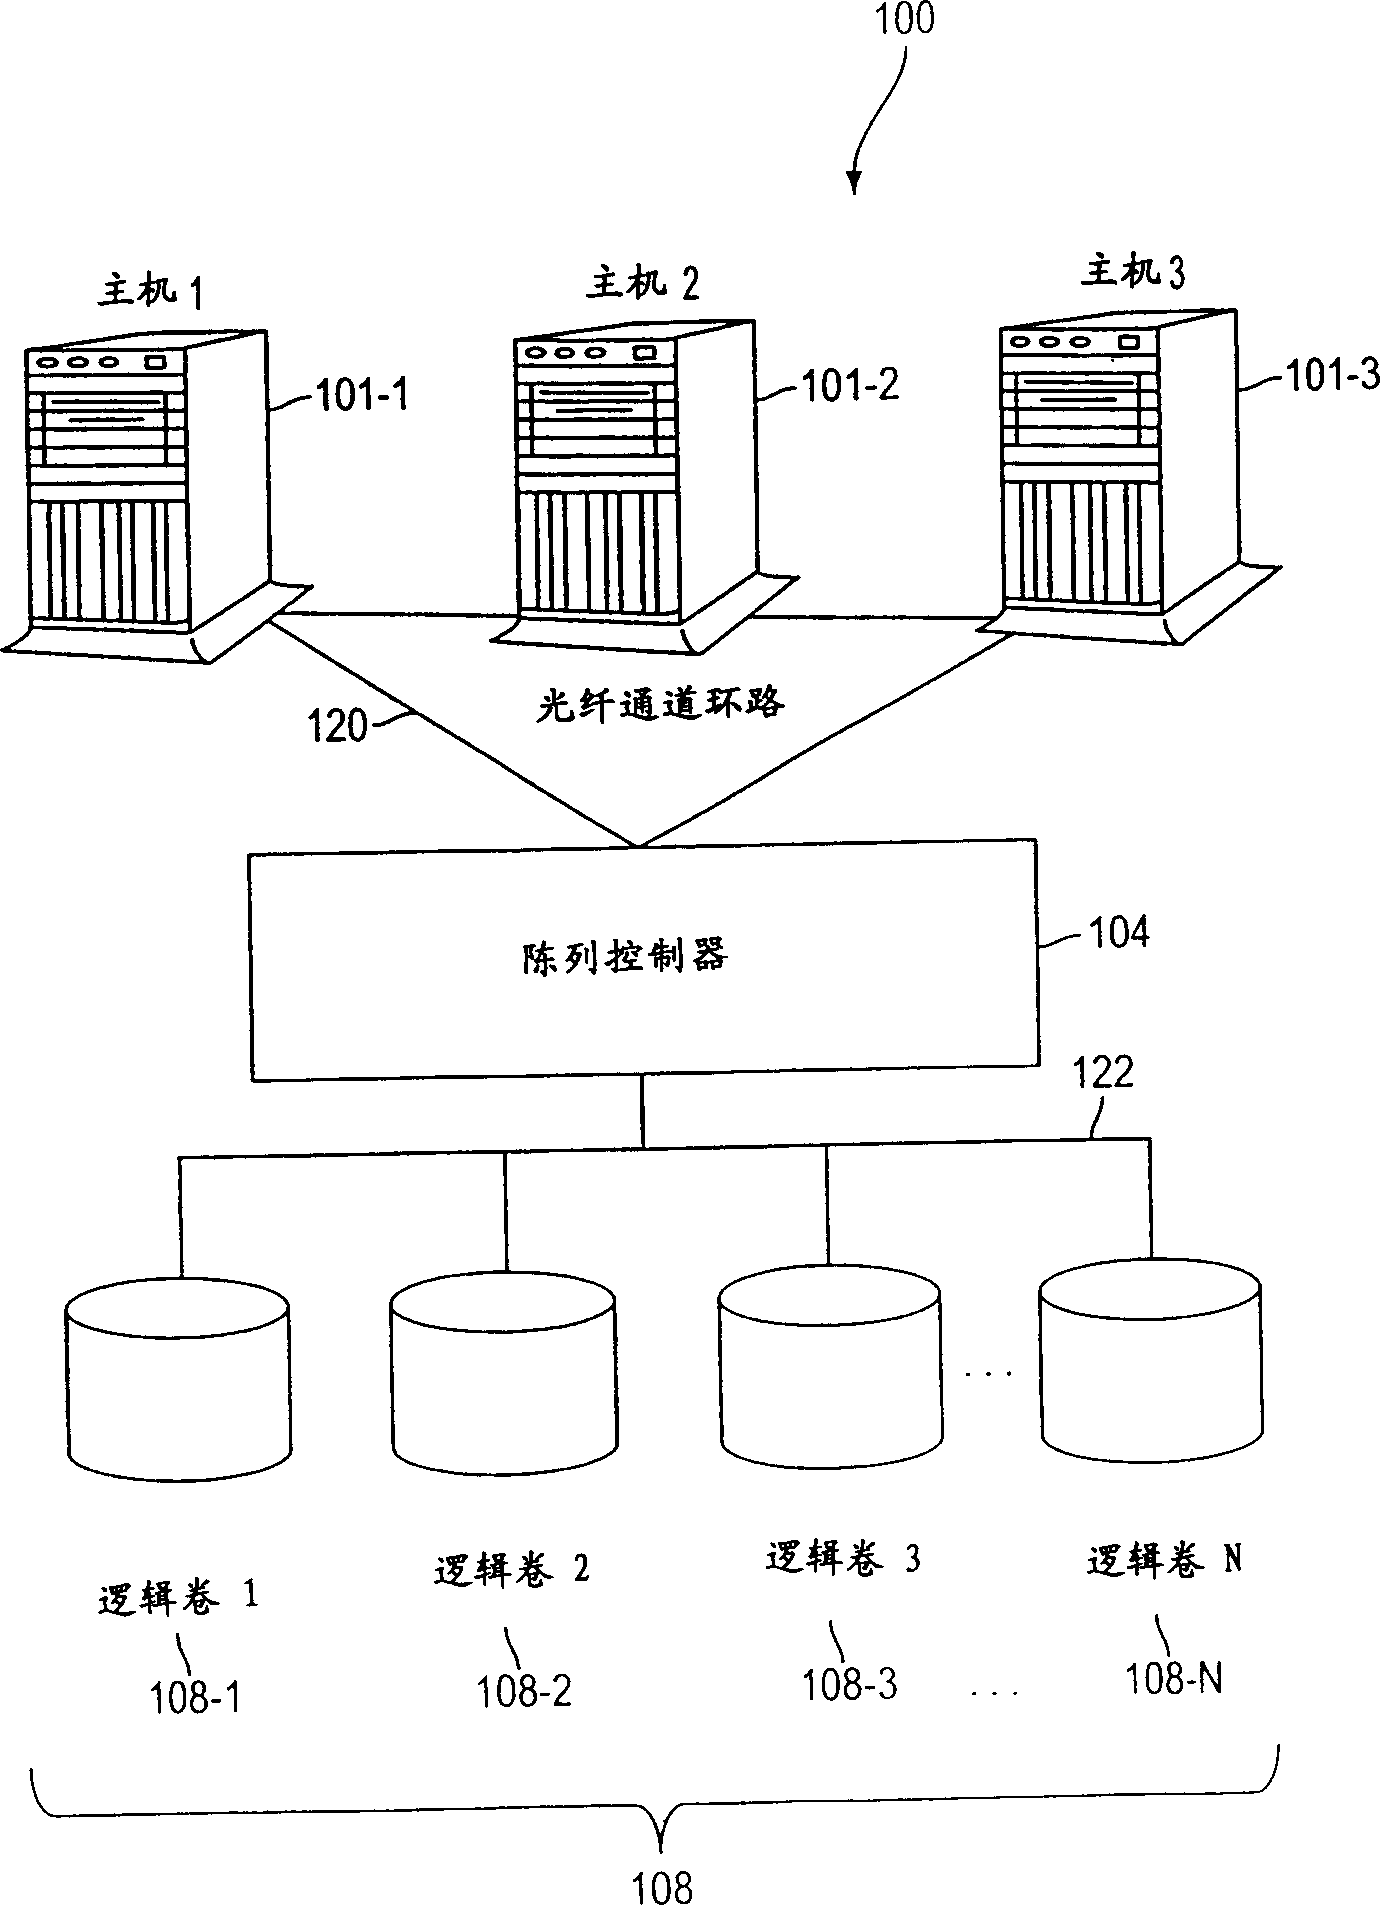 System and method for host volume mapping for shared storage volumes in multi-host computing environment